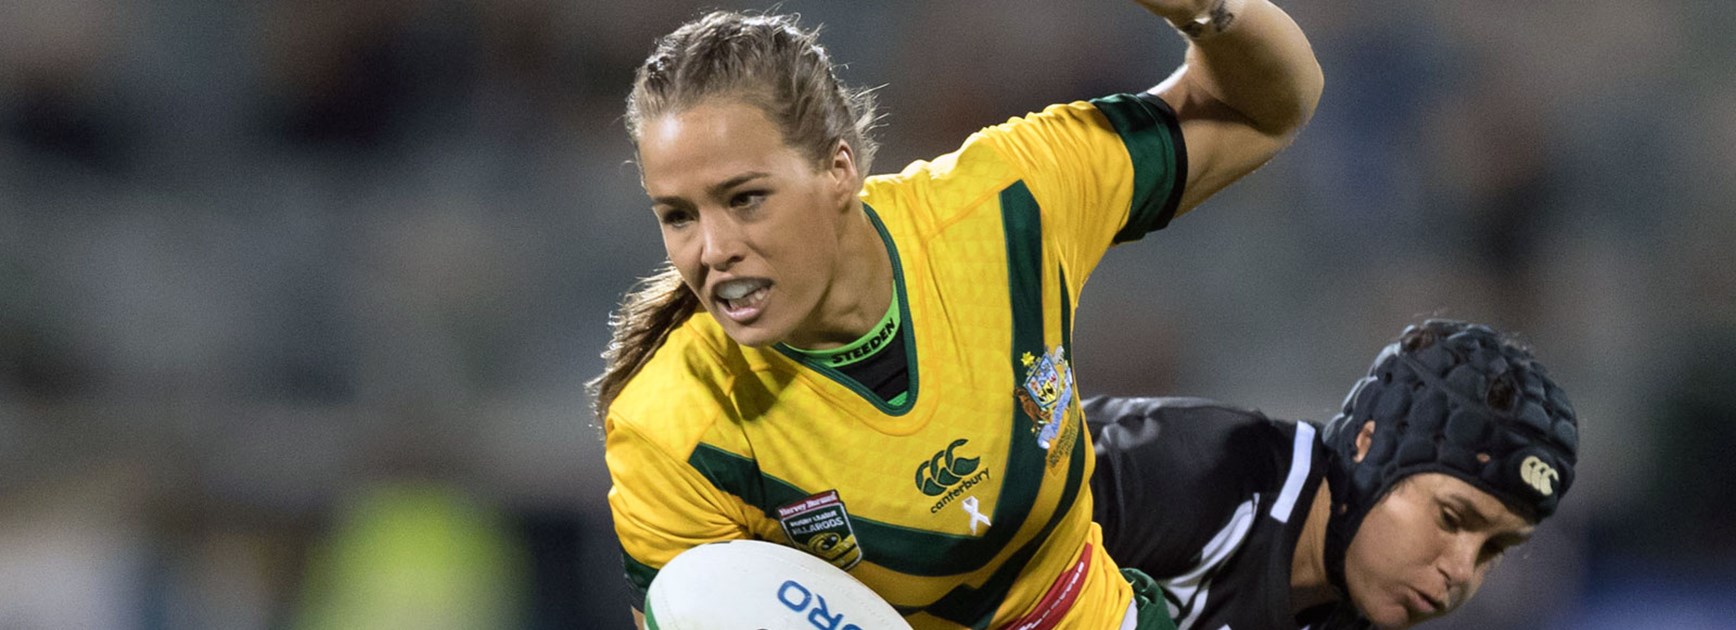 Timely World Cup auditions for Jillaroos debutants